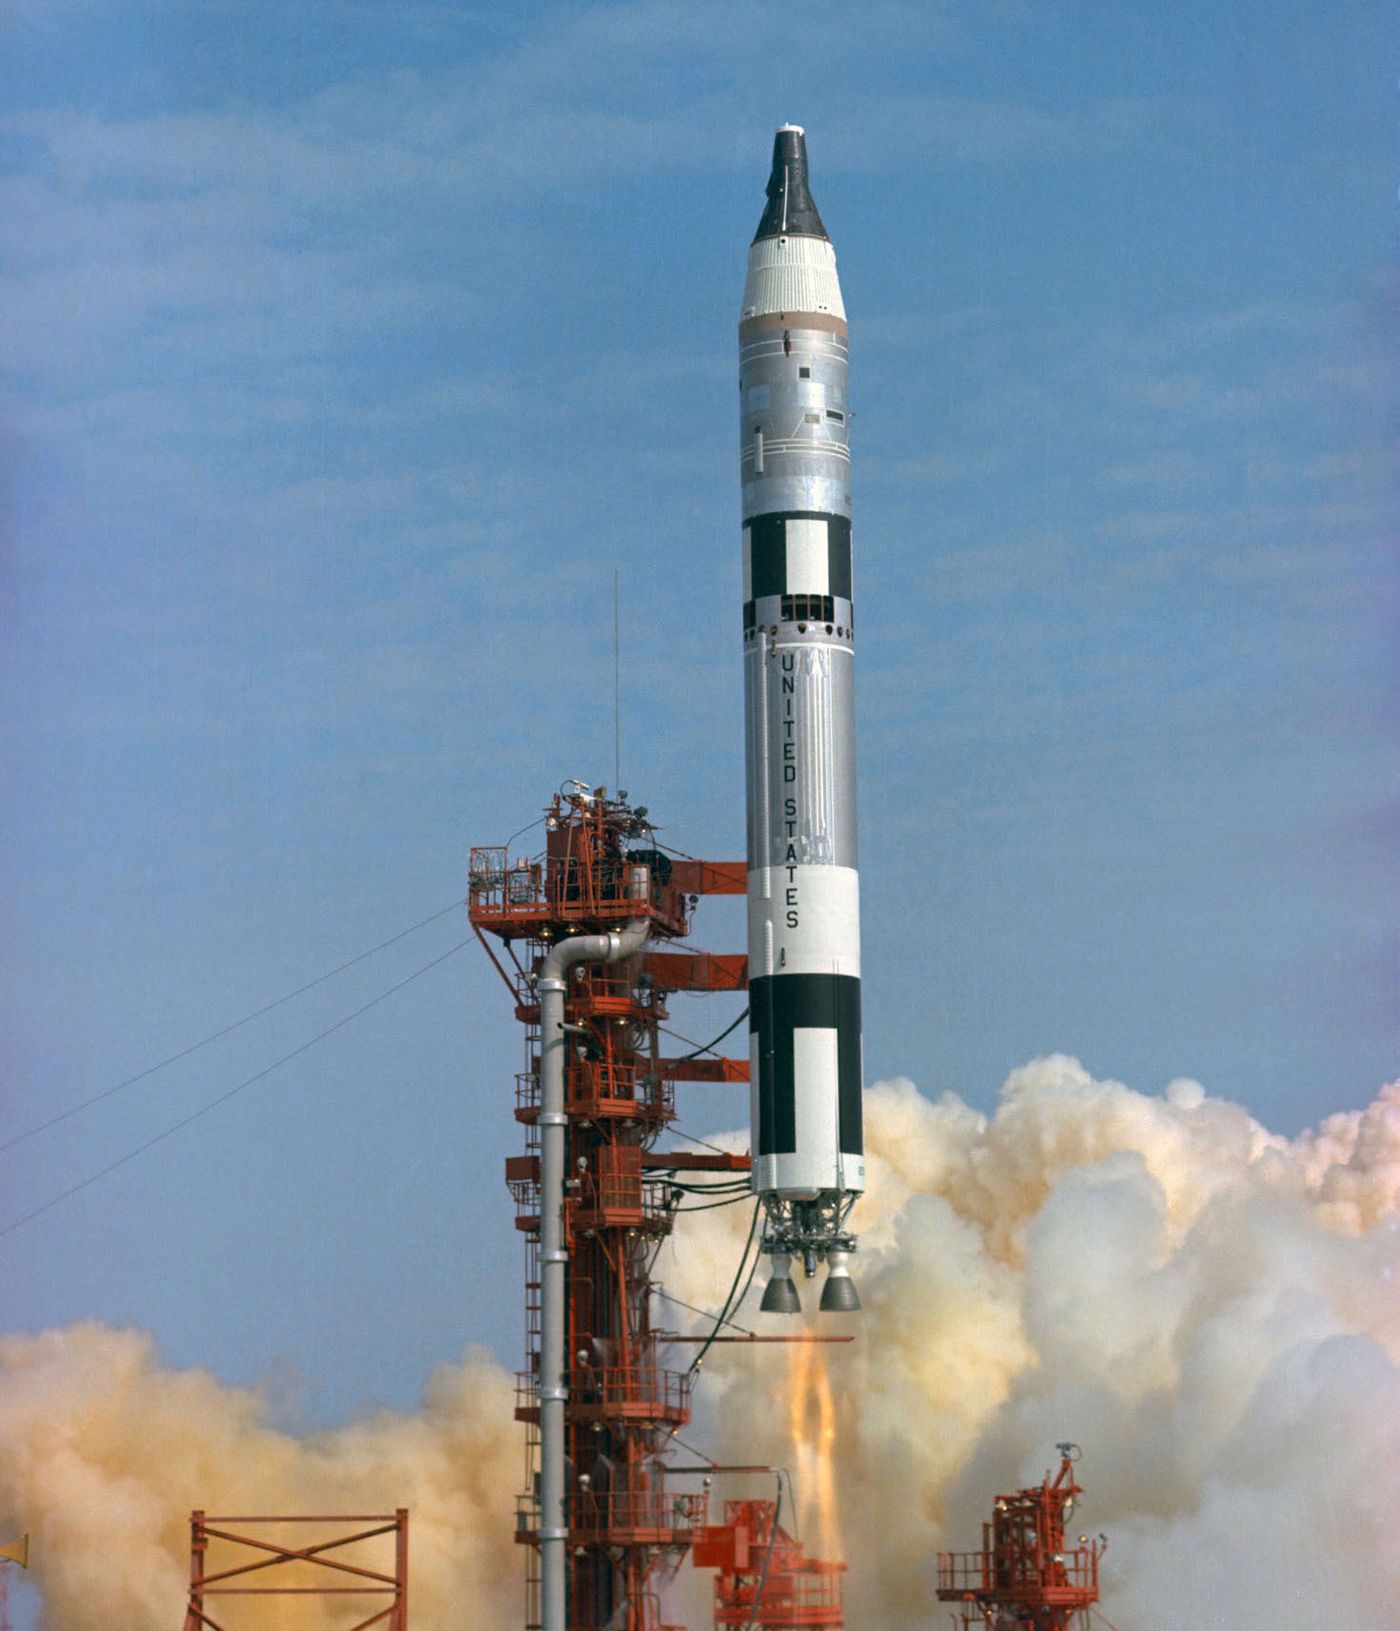 Launch of Gemini 3, the first crewed launch of Project Gemini, on March 23, 1965. (Credit: NASA)